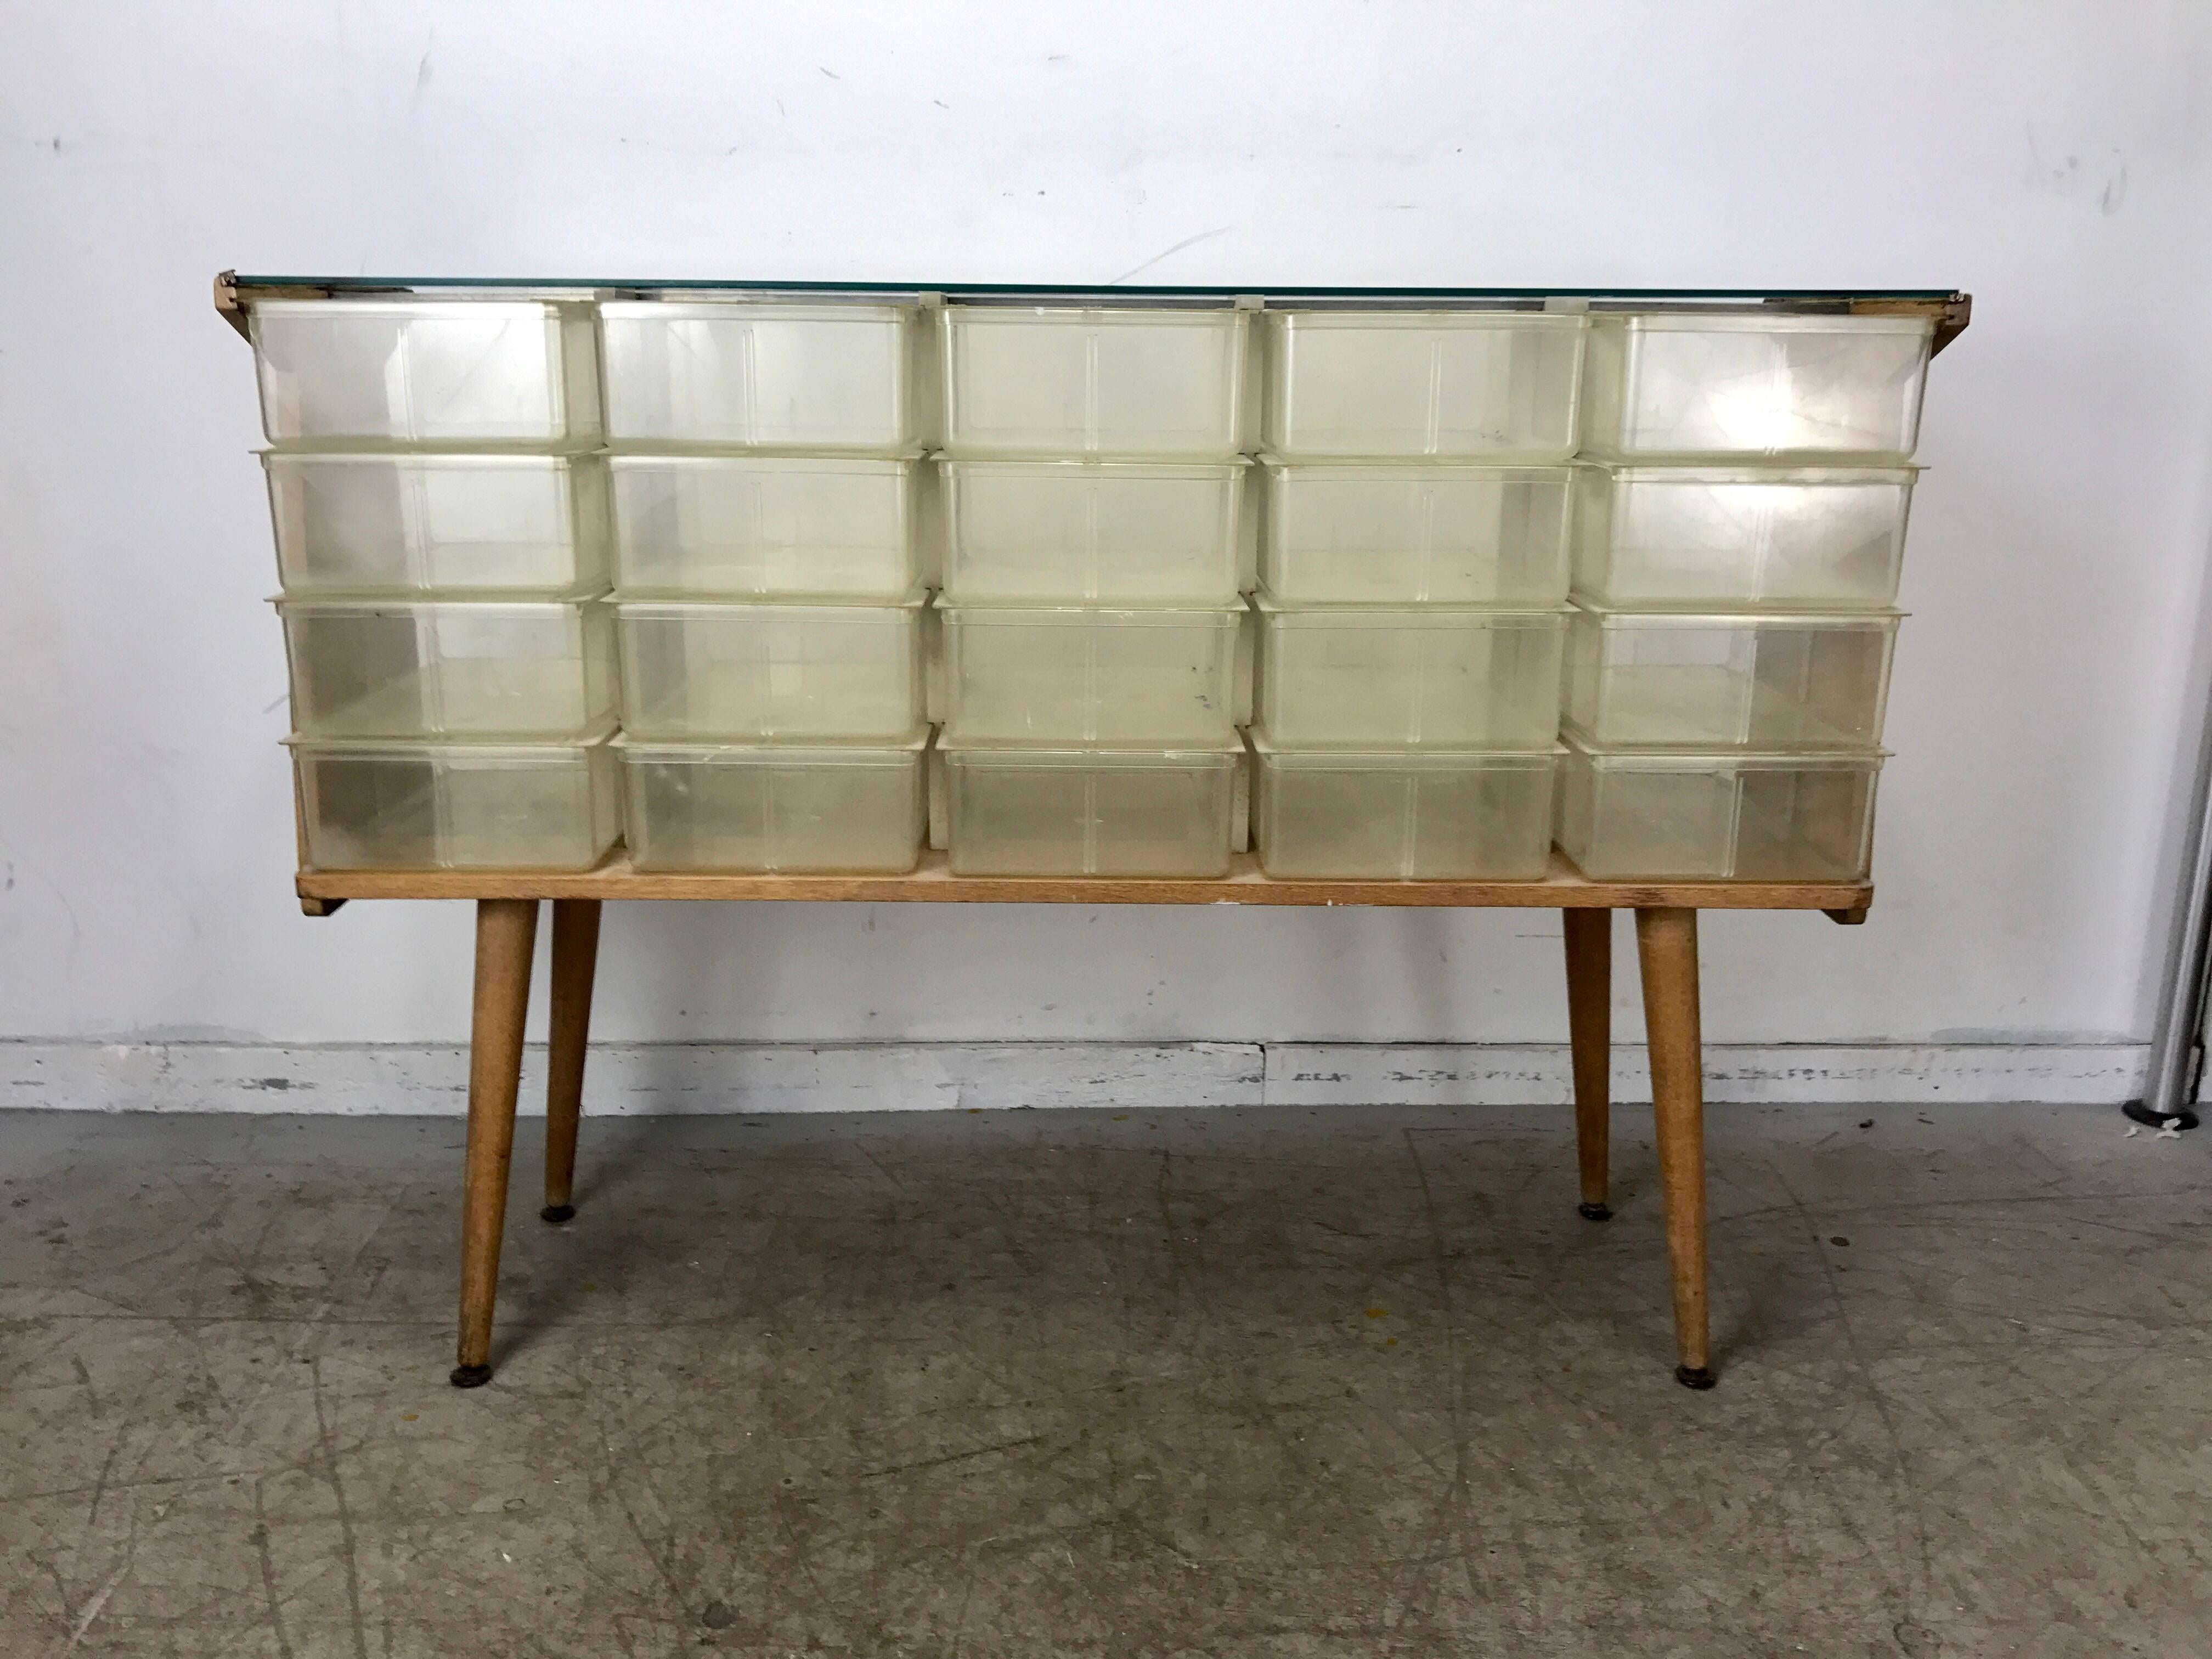 Unusual Mid-Century Modern Store Fixture, Plastic, Wood and Glass, 20 Cubbies In Good Condition For Sale In Buffalo, NY